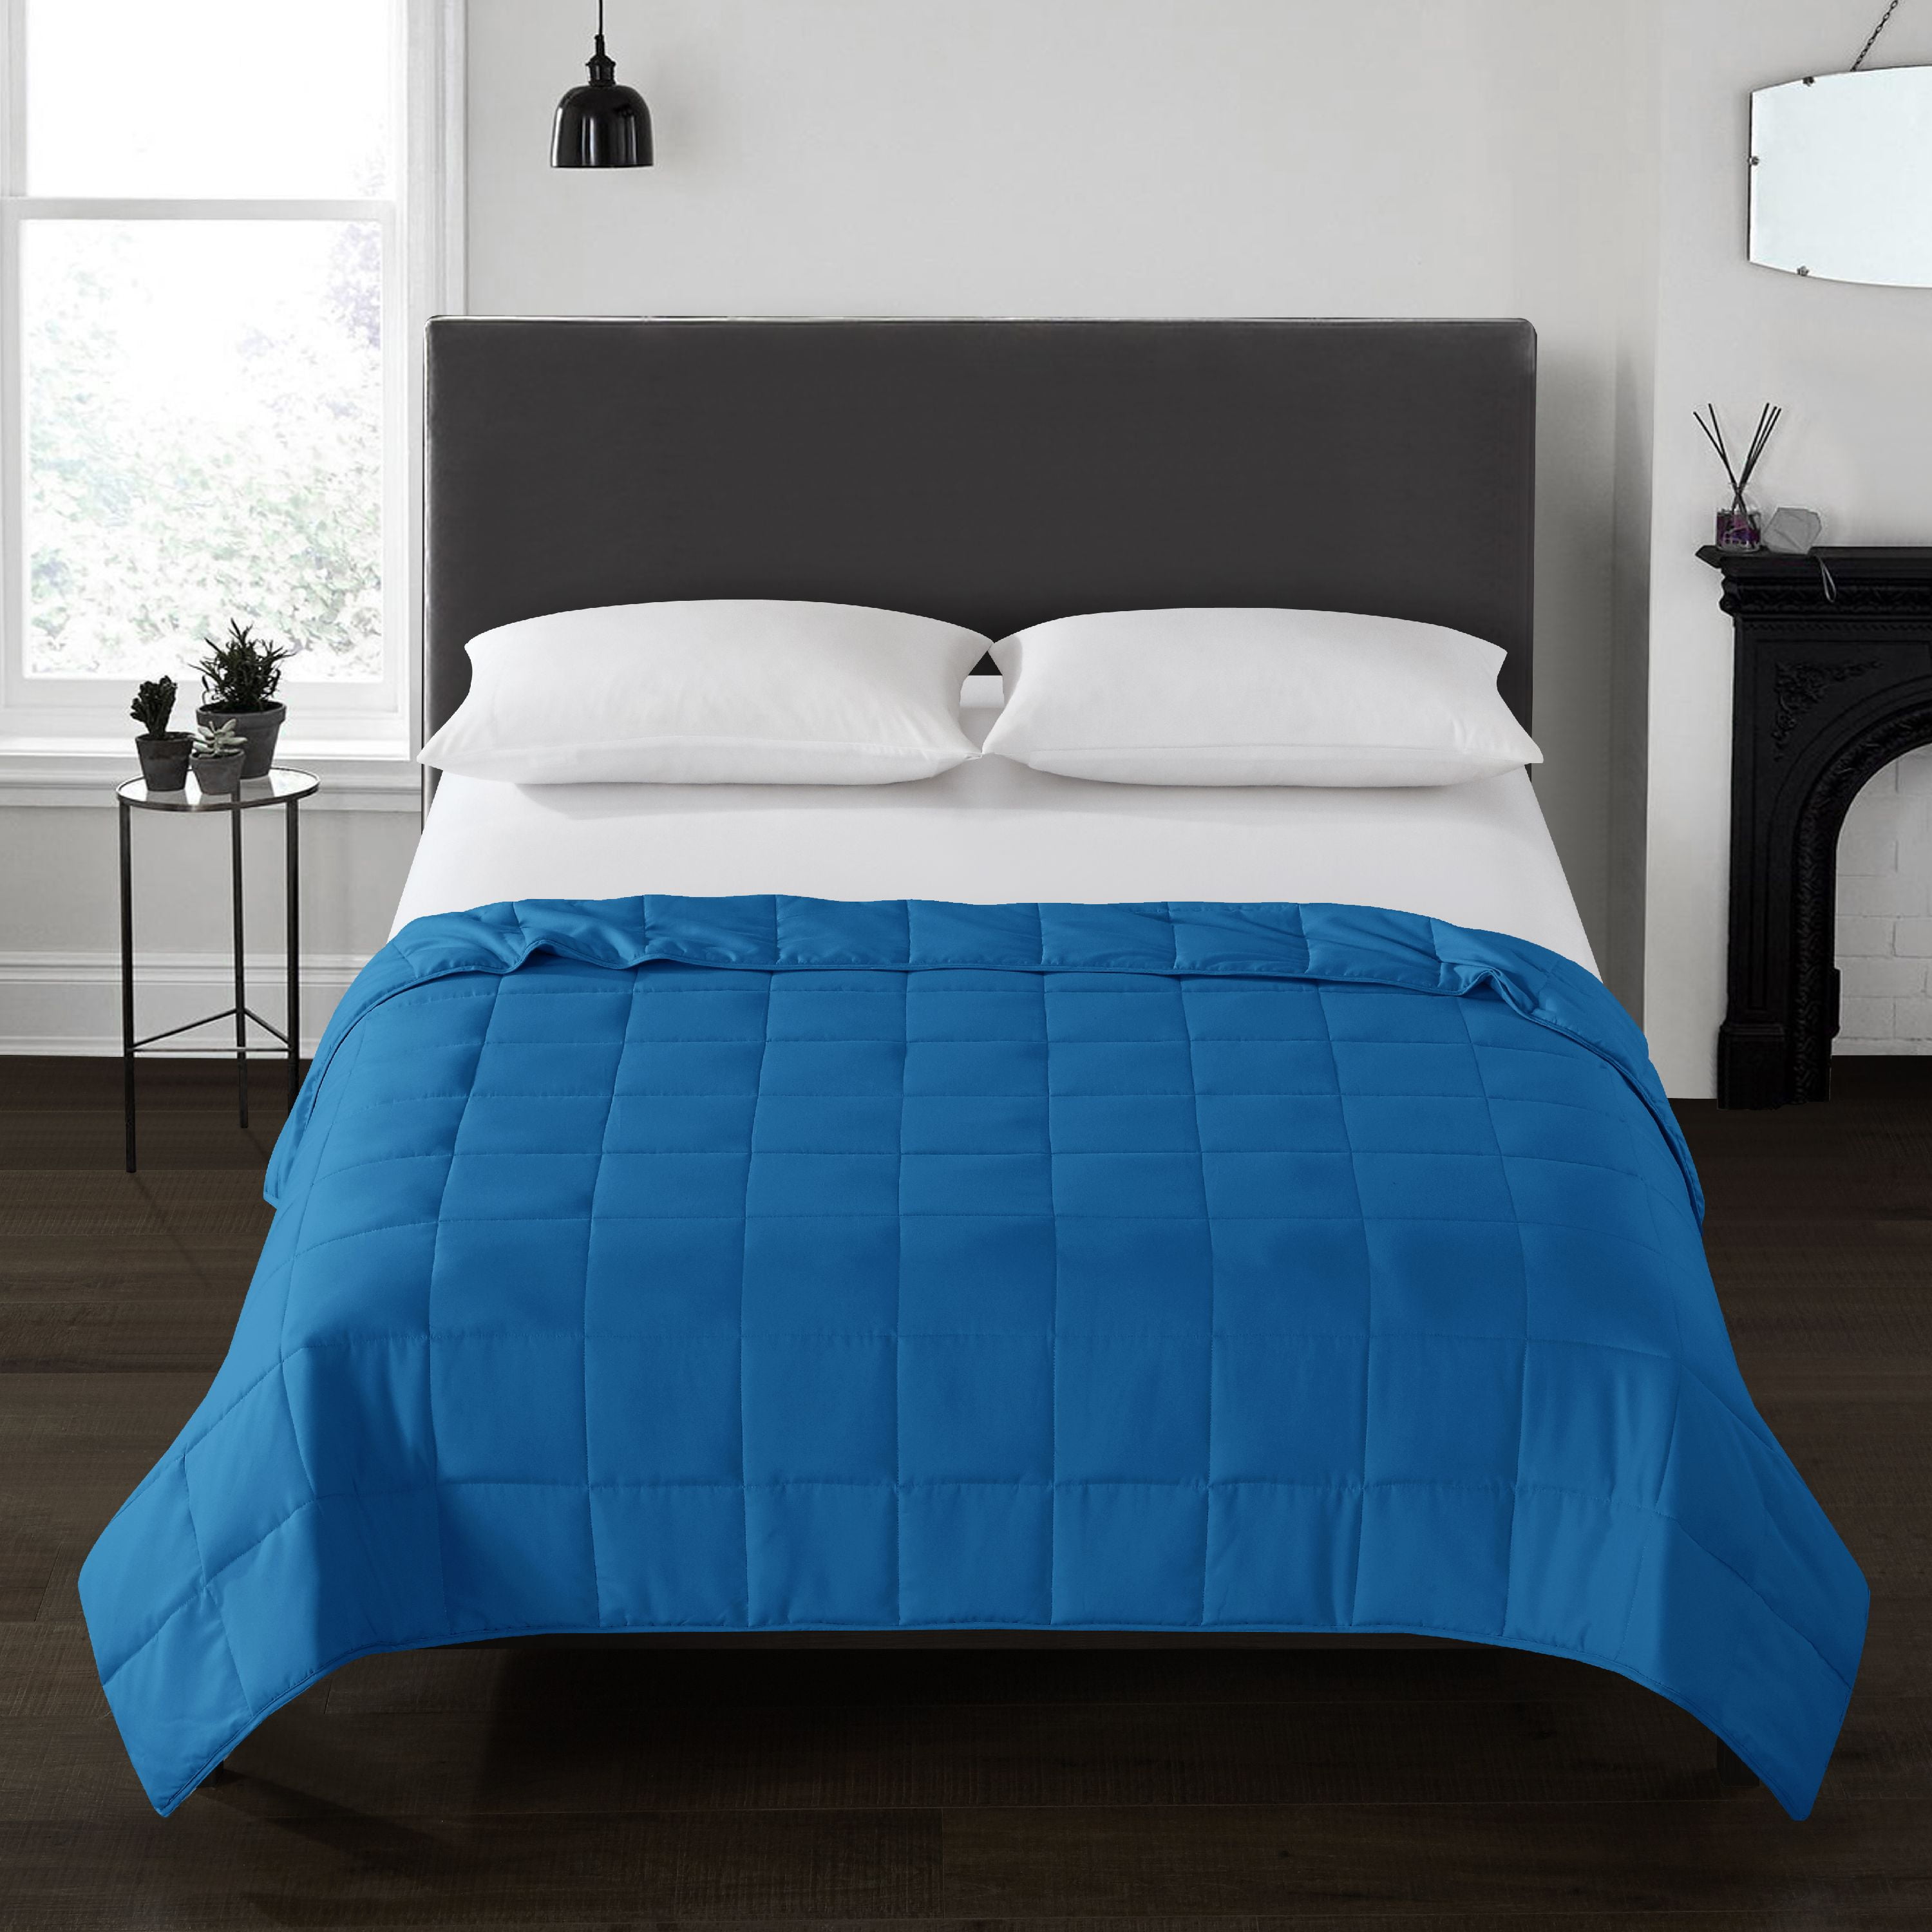 Well Being Soft Weighted Blanket (20lbs, 60"x80", Queen Size), Blue